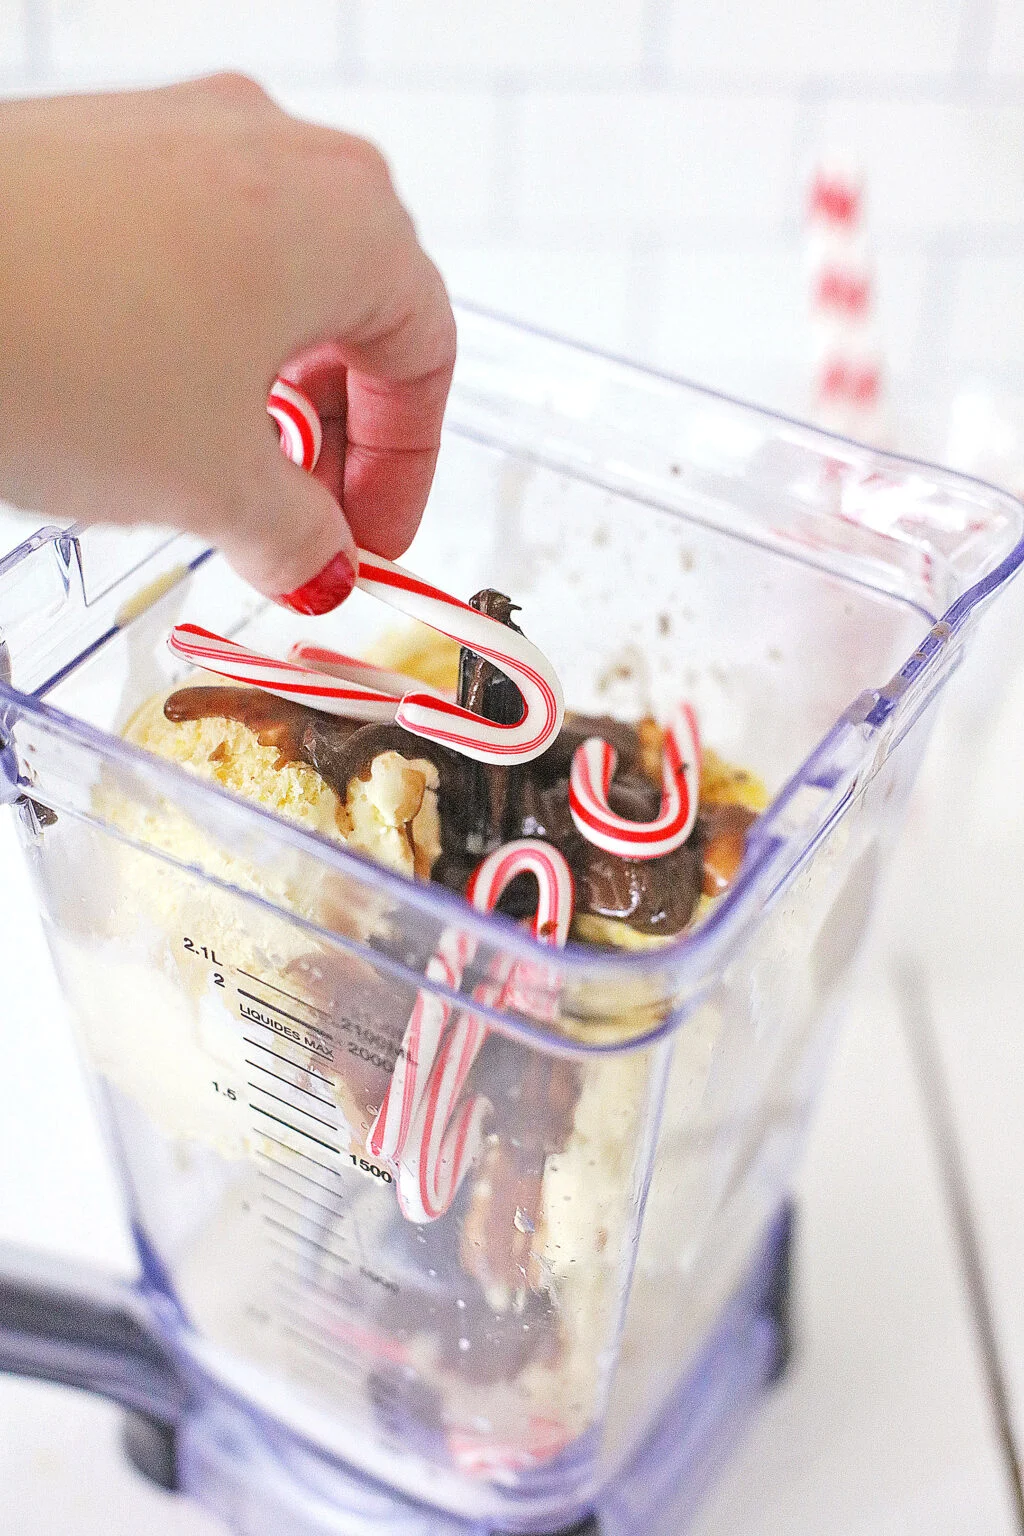 mini candy canes being put into blender